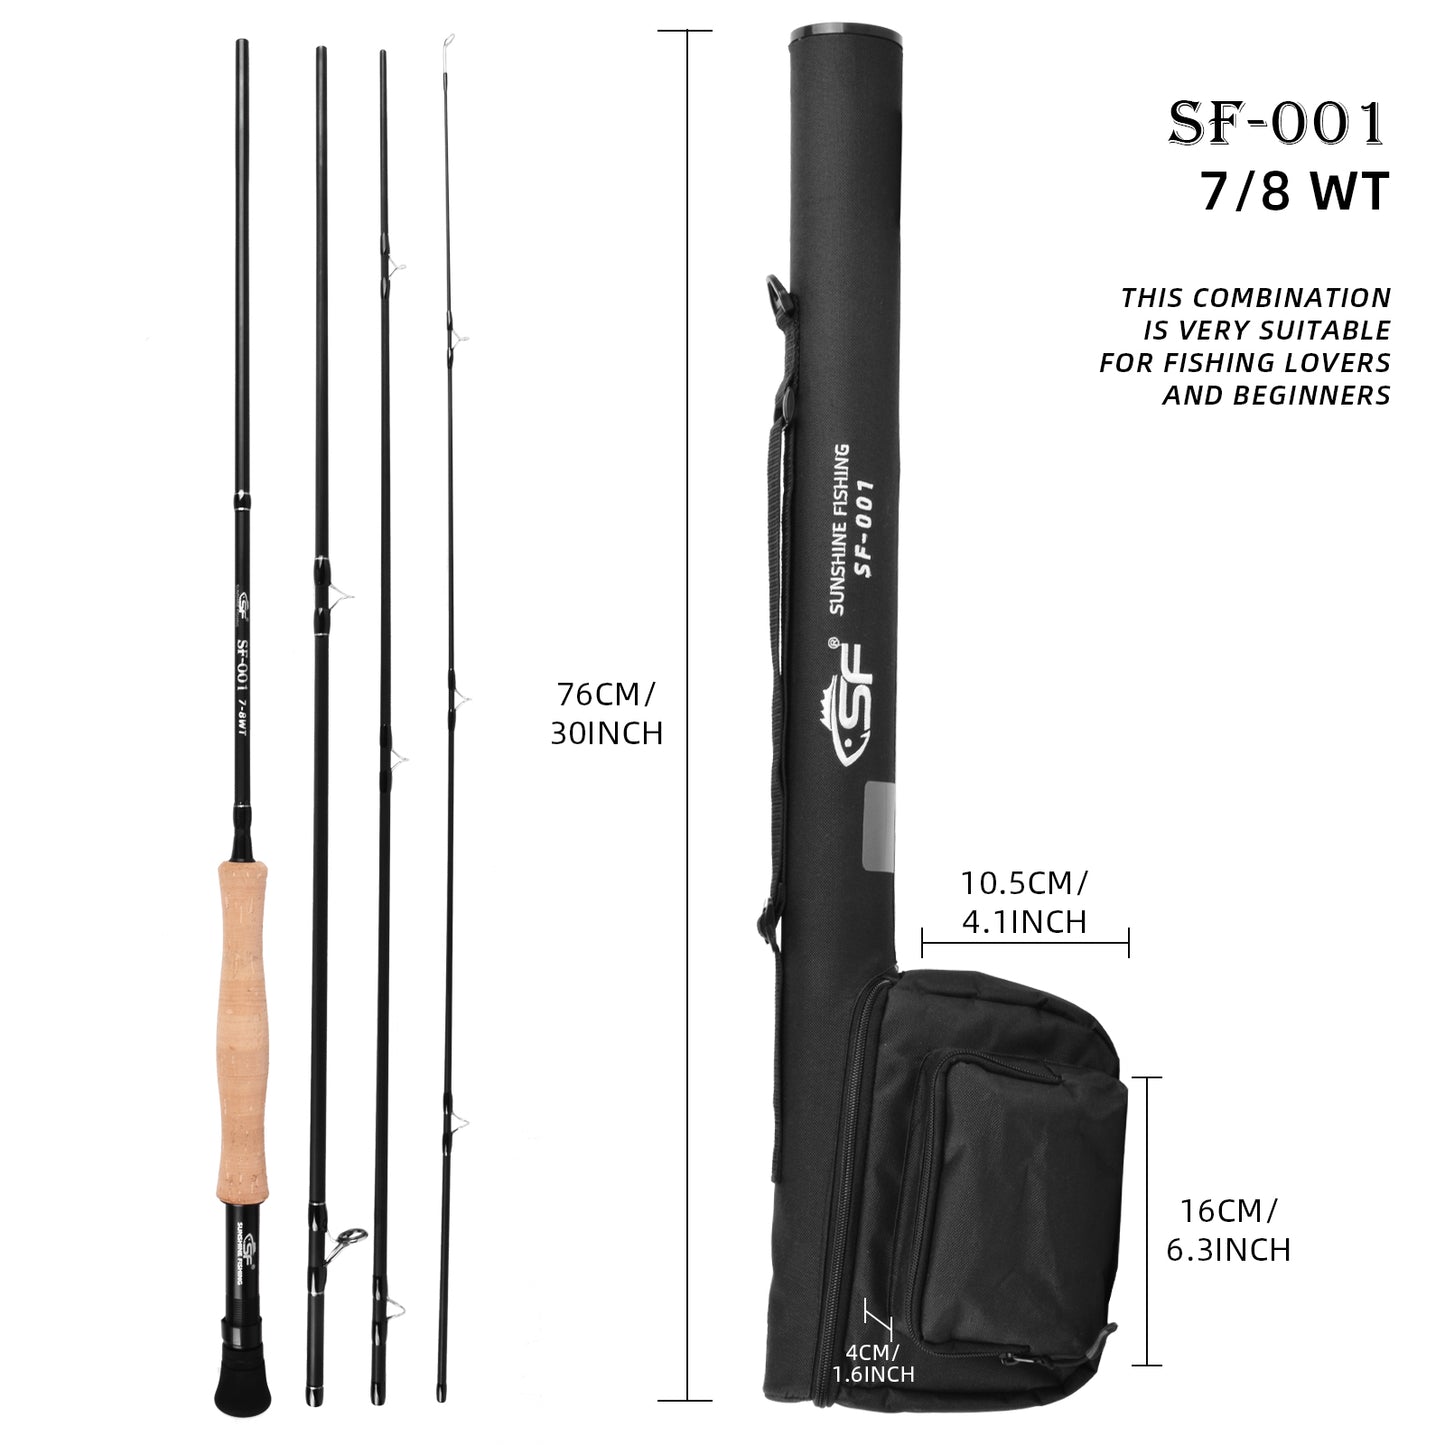 SF Fly Fishing Medium-Fast Action Rod Combo Kit 4 Piece 7/8wt 9FT for New and Younger Anglers